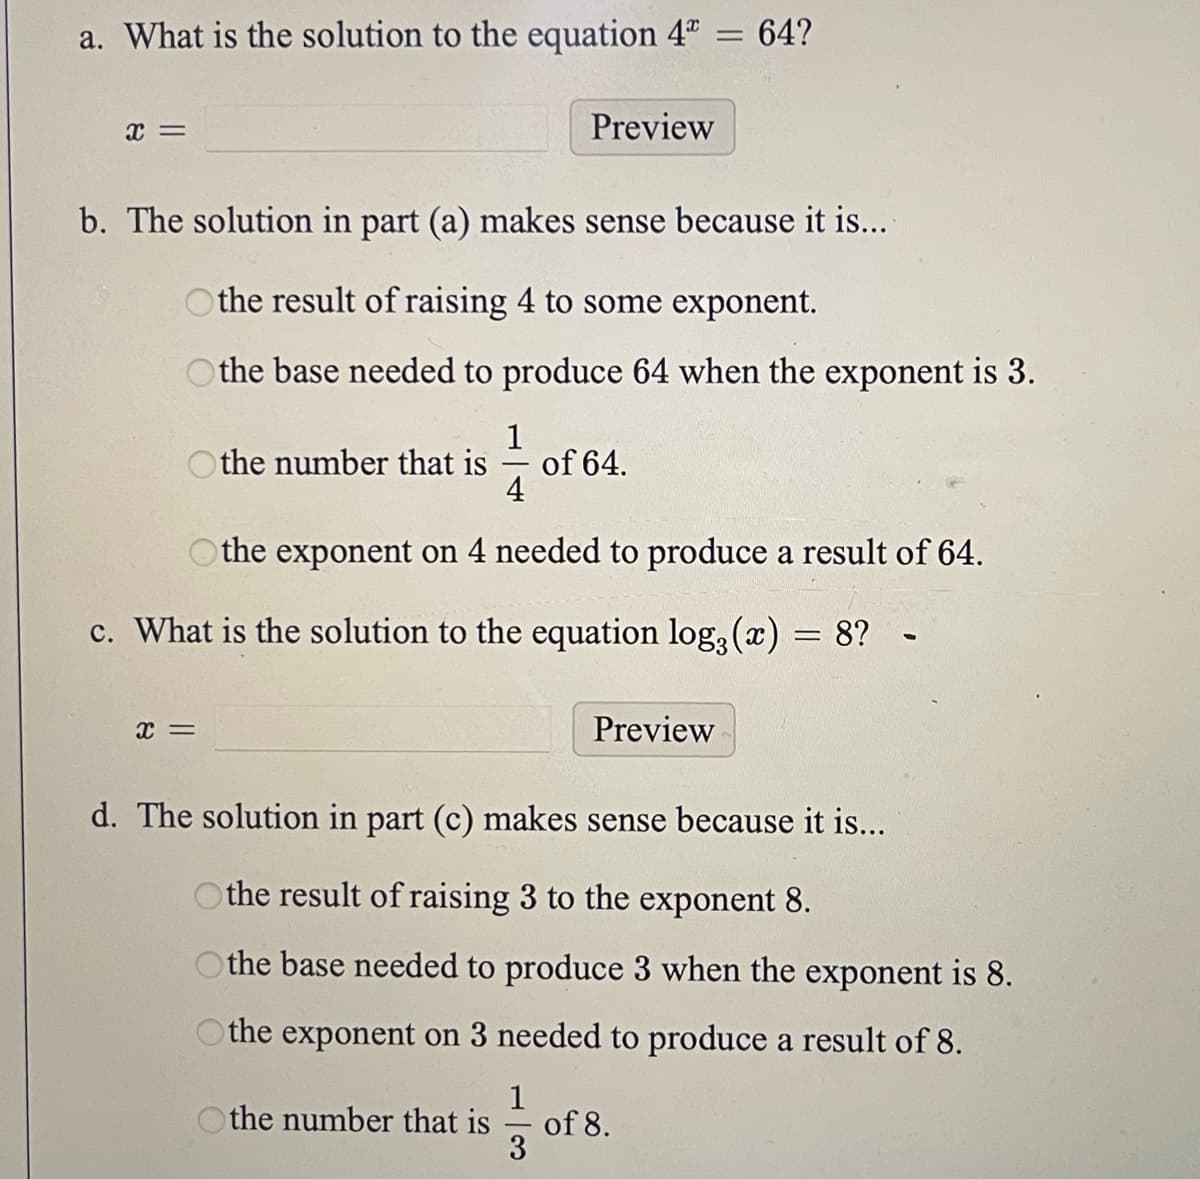 a. What is the solution to the equation 4*
x =
Othe number that is
Preview
b. The solution in part (a) makes sense because it is....
Othe result of raising 4 to some exponent.
Othe base needed to produce 64 when the exponent is 3.
1
X =
of 64.
=
64?
4
the exponent on 4 needed to produce a result of 64.
c. What is the solution to the equation log(x) = 8?
Preview
1
the number that is of 8.
3
d. The solution in part (c) makes sense because it is...
the result of raising 3 to the exponent 8.
Othe base needed to produce 3 when the exponent is 8.
the exponent on 3 needed to produce a result of 8.